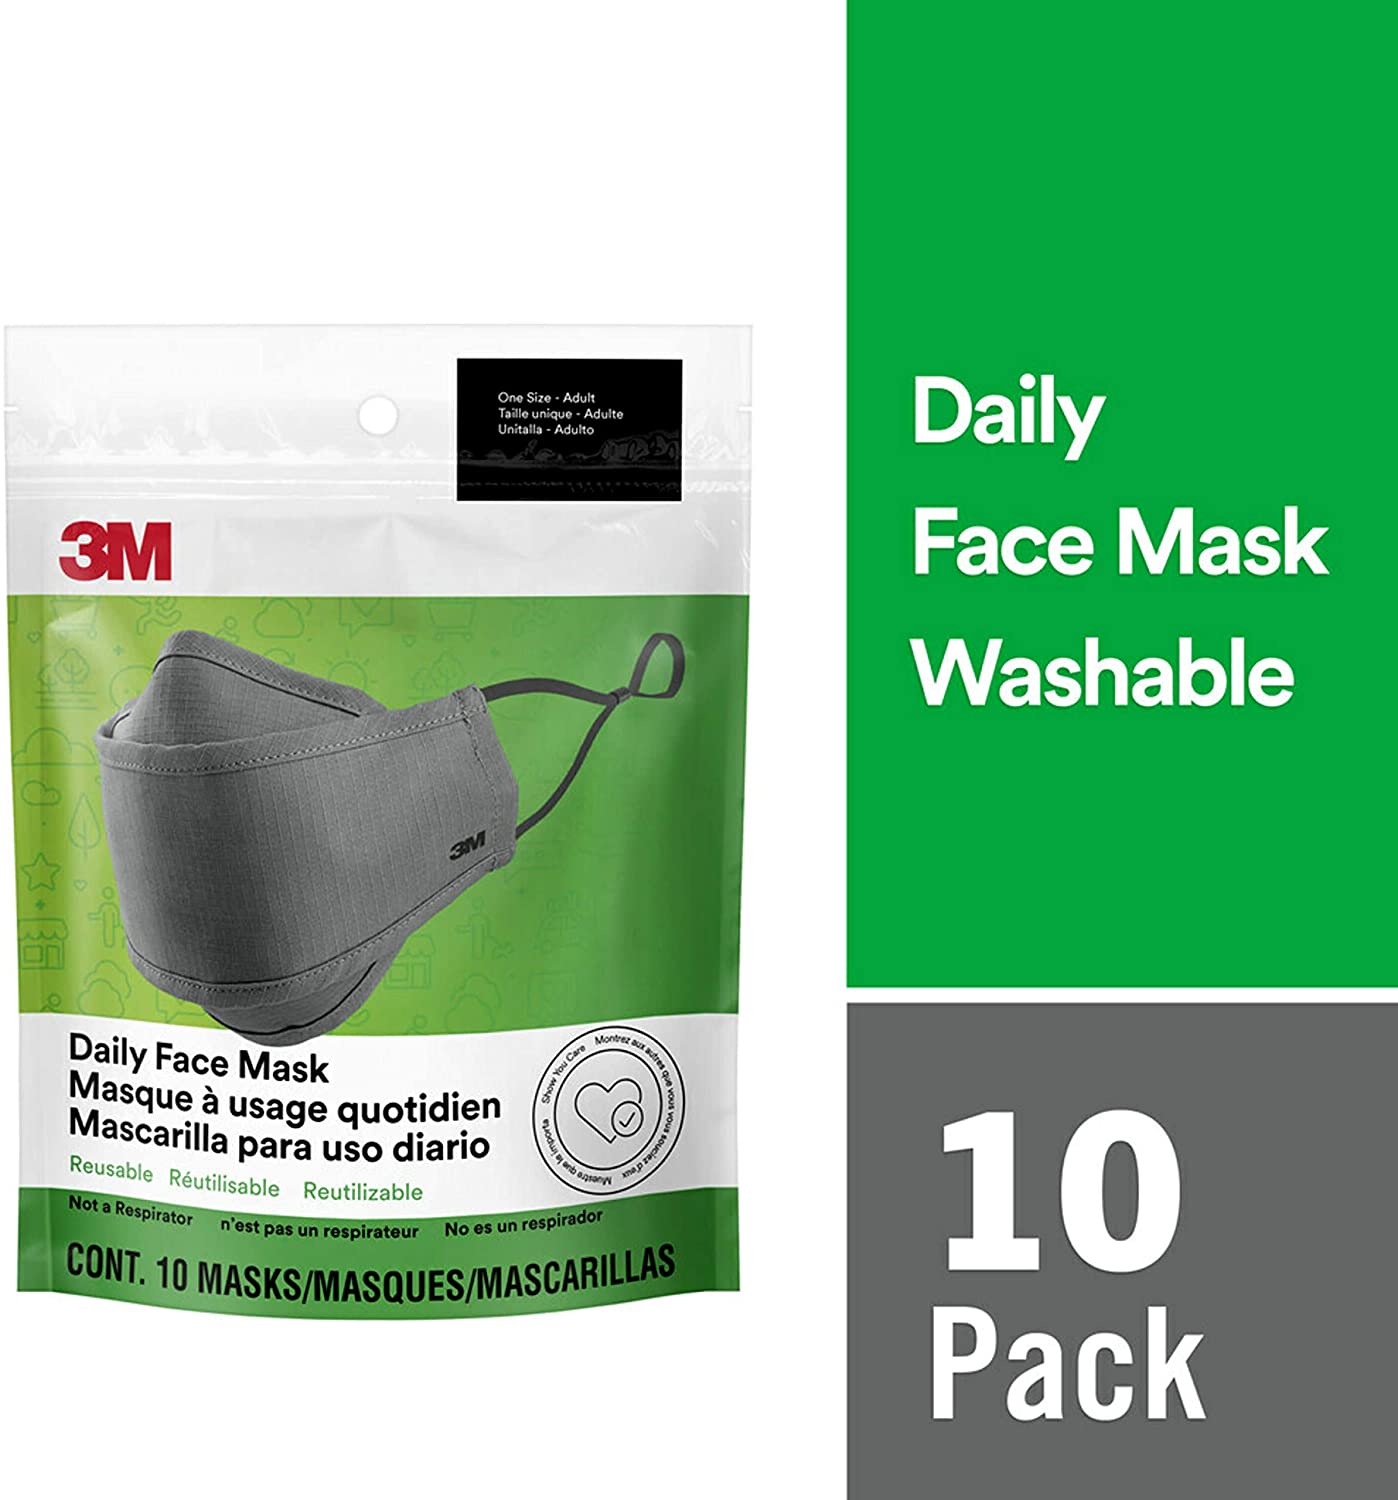 3M Daily Face Mask, Reusable, Washable, Adjustable Ear Loops, Lightweight Cotton Fabric, 10 Pack, Gray